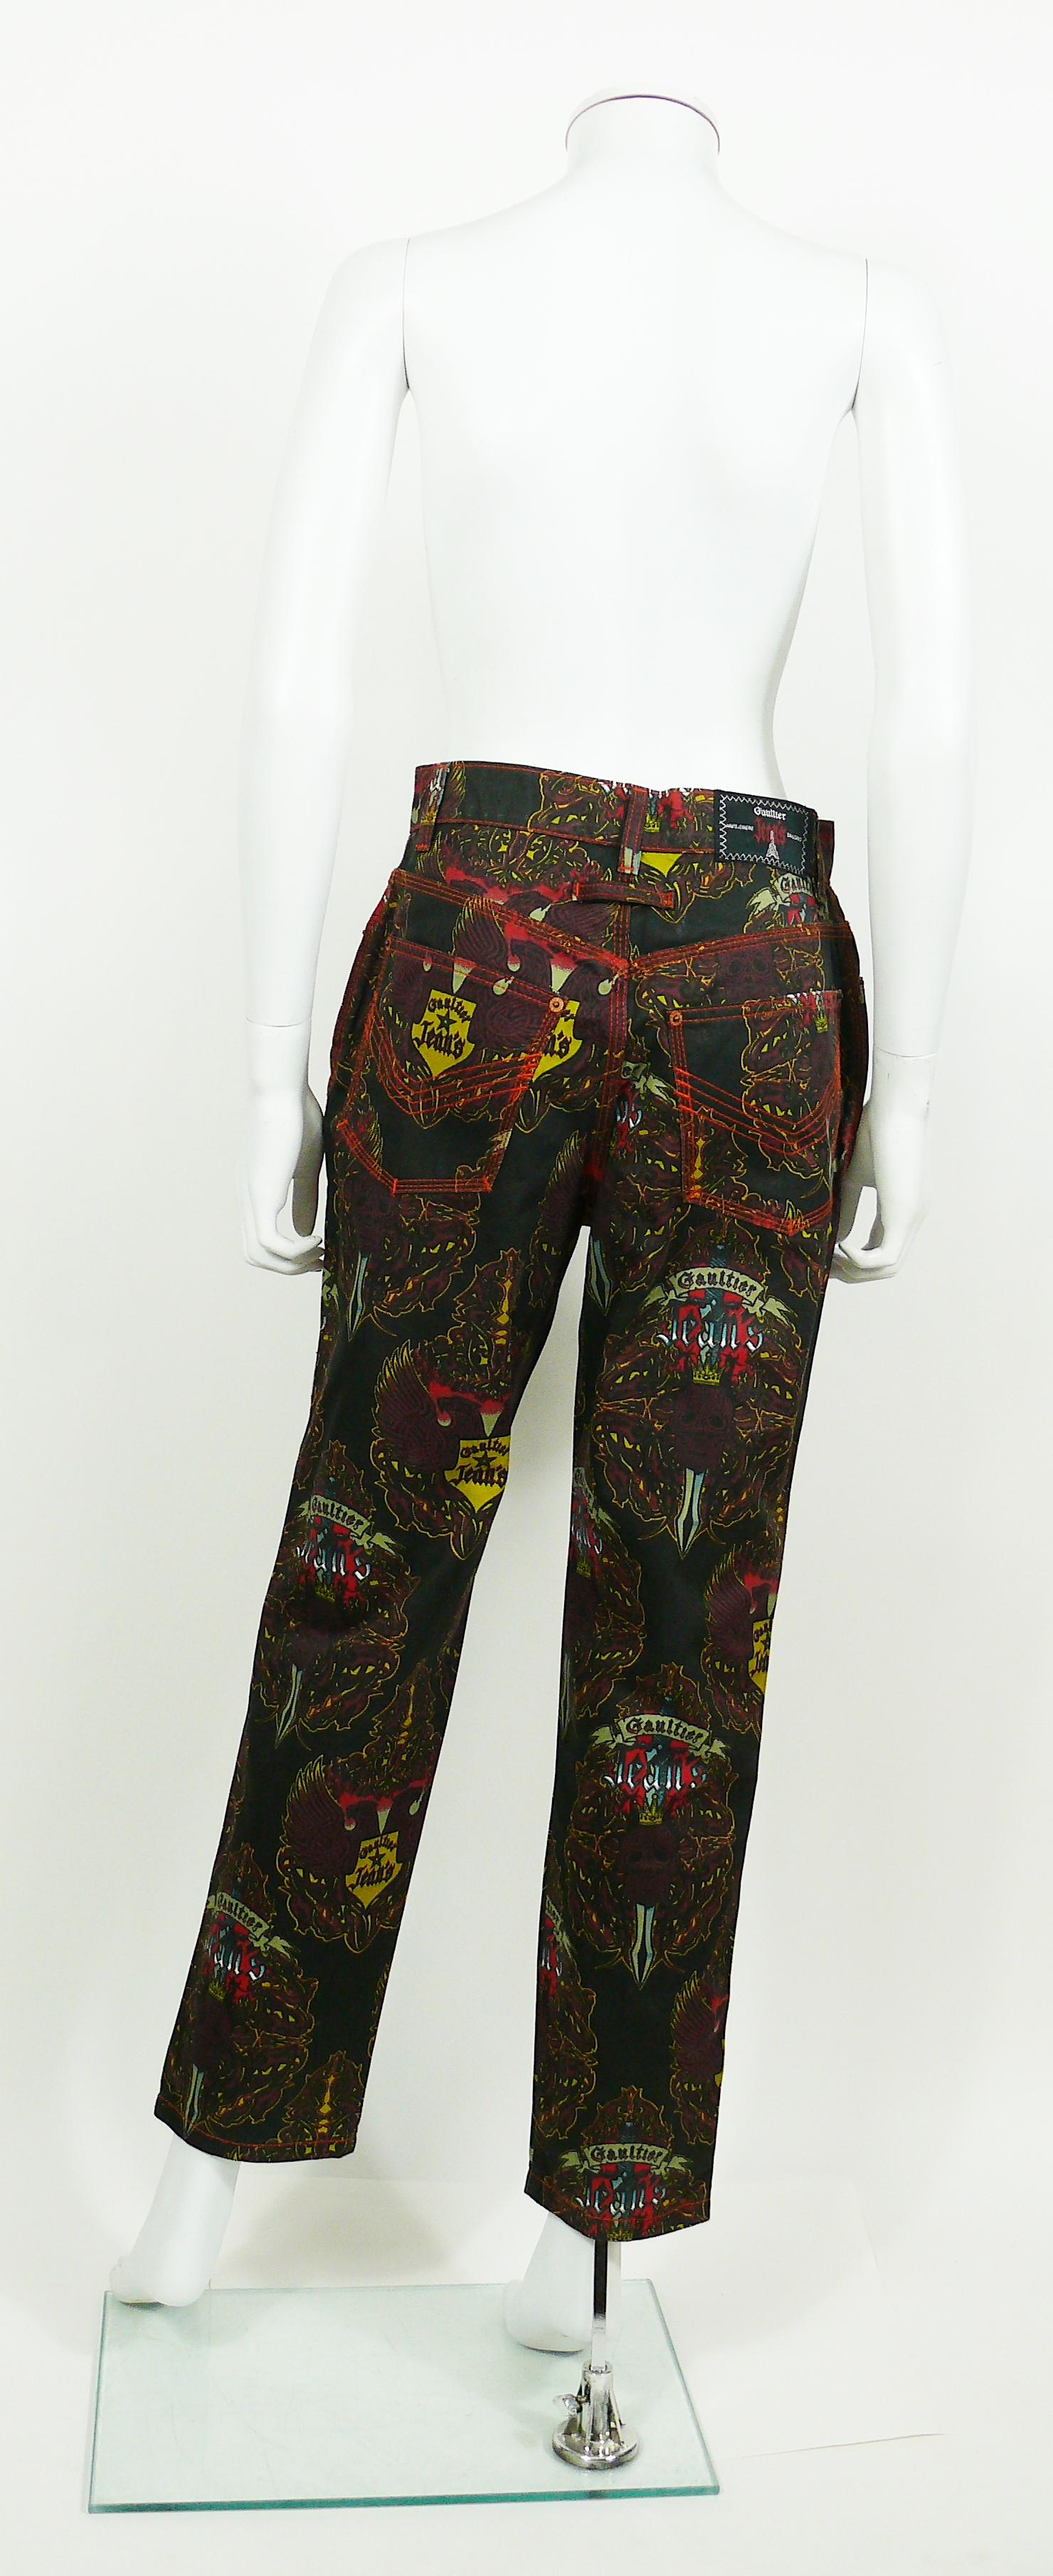 Black Jean Paul Gaultier Vintage Crowned Skull and Eagle Print Pants Trousers For Sale